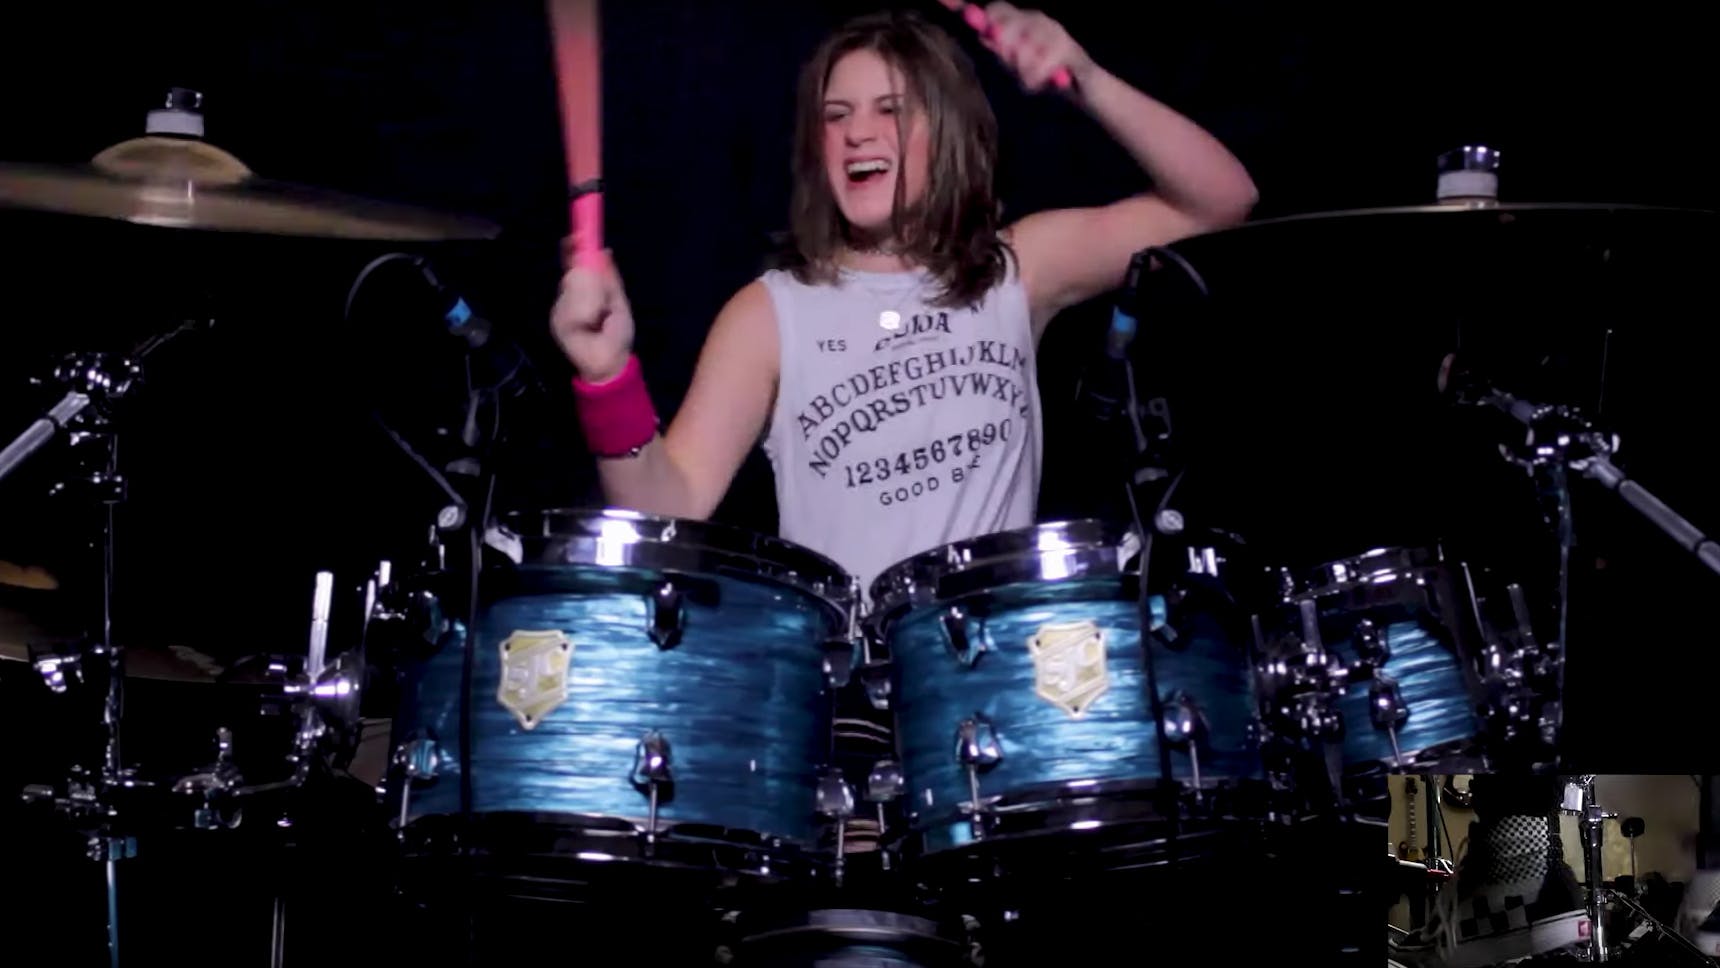 Watch This 14-Year-Old Drummer Crush Slipknot's Unsainted